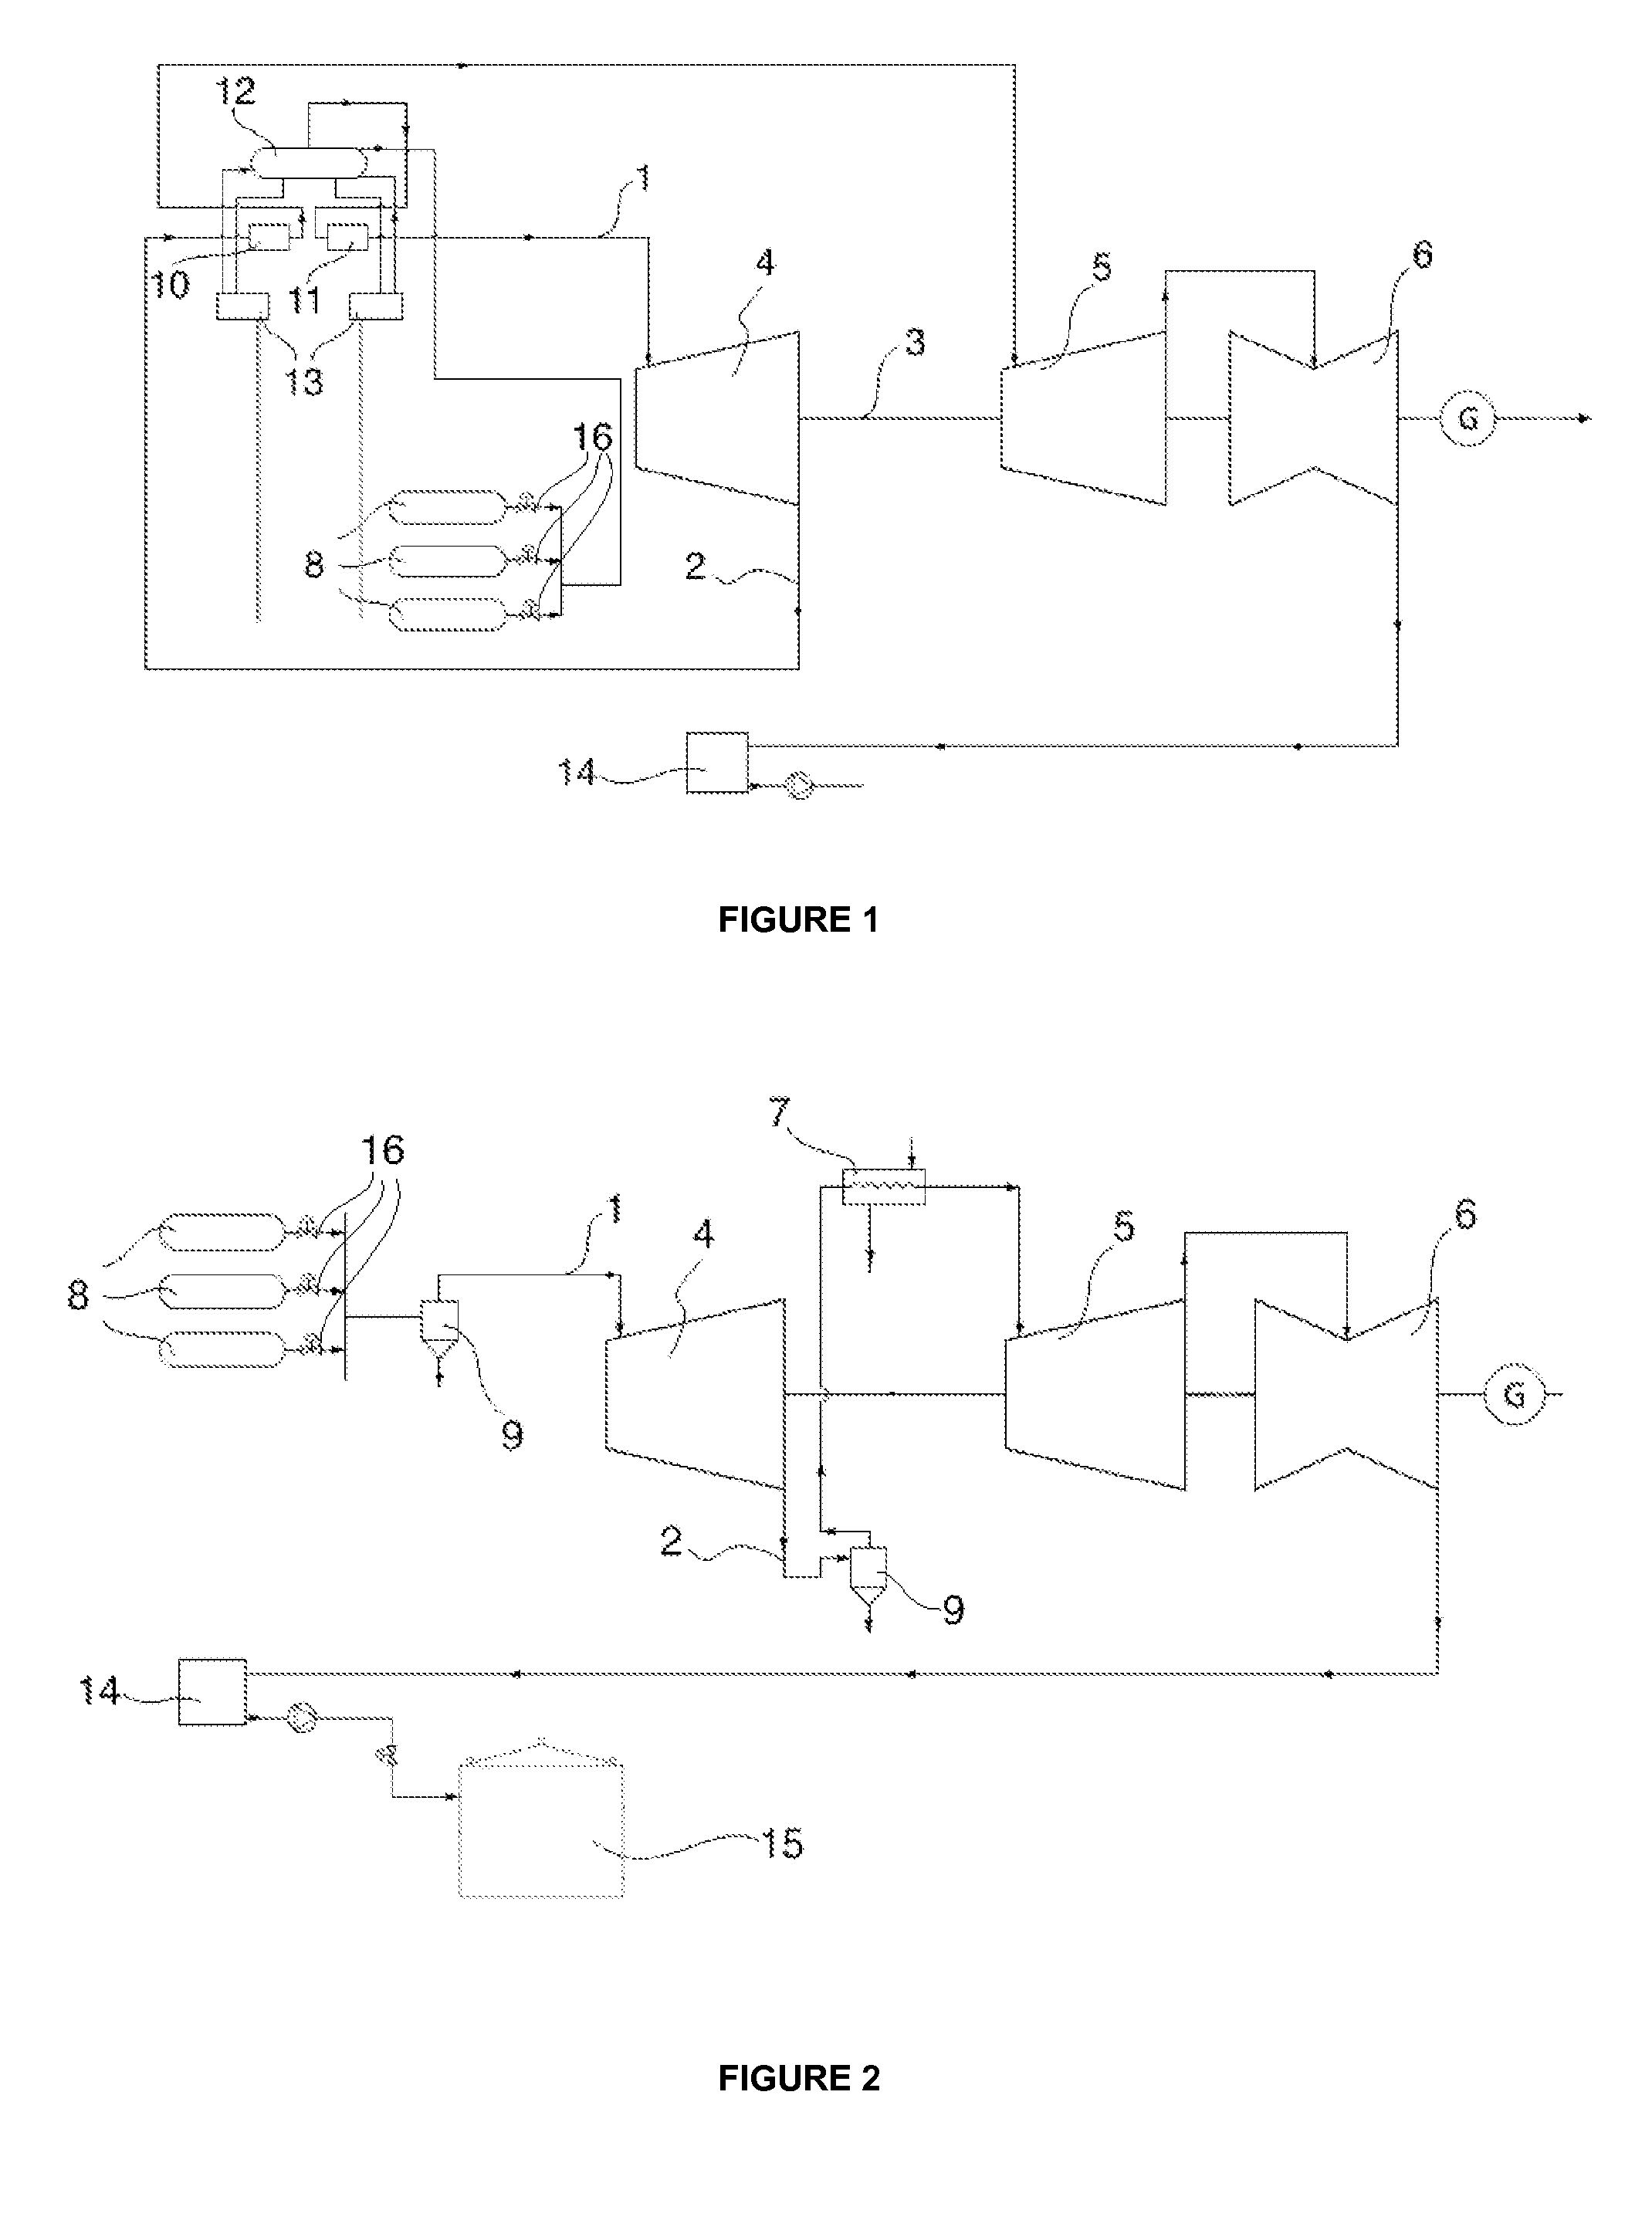 Method for operating a thermoelectric solar plant